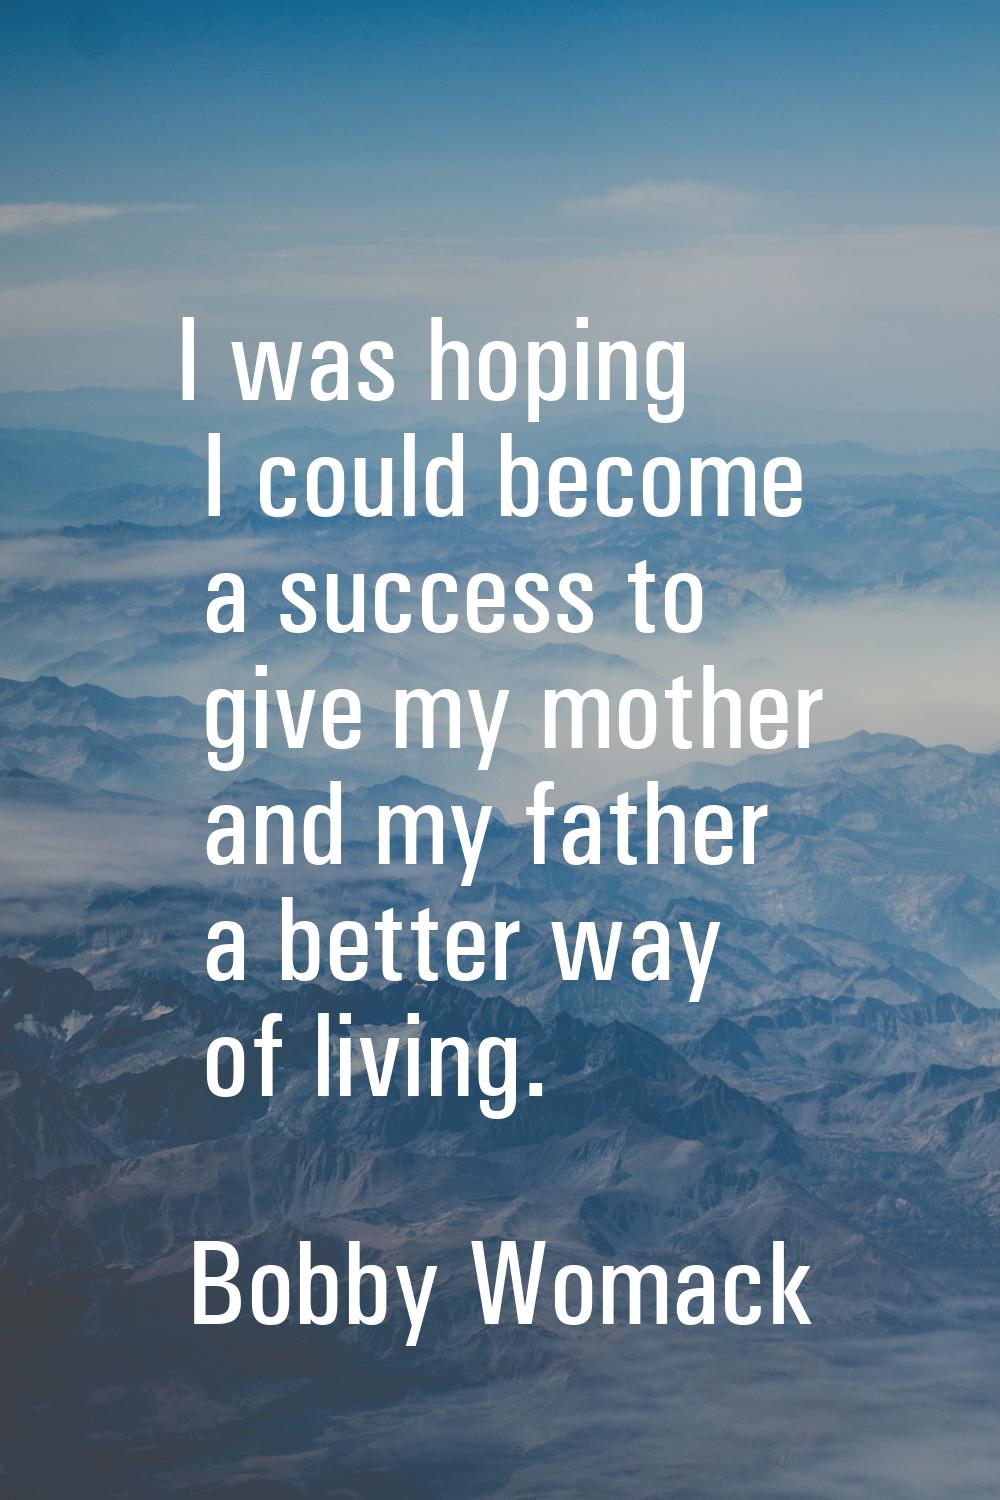 I was hoping I could become a success to give my mother and my father a better way of living.